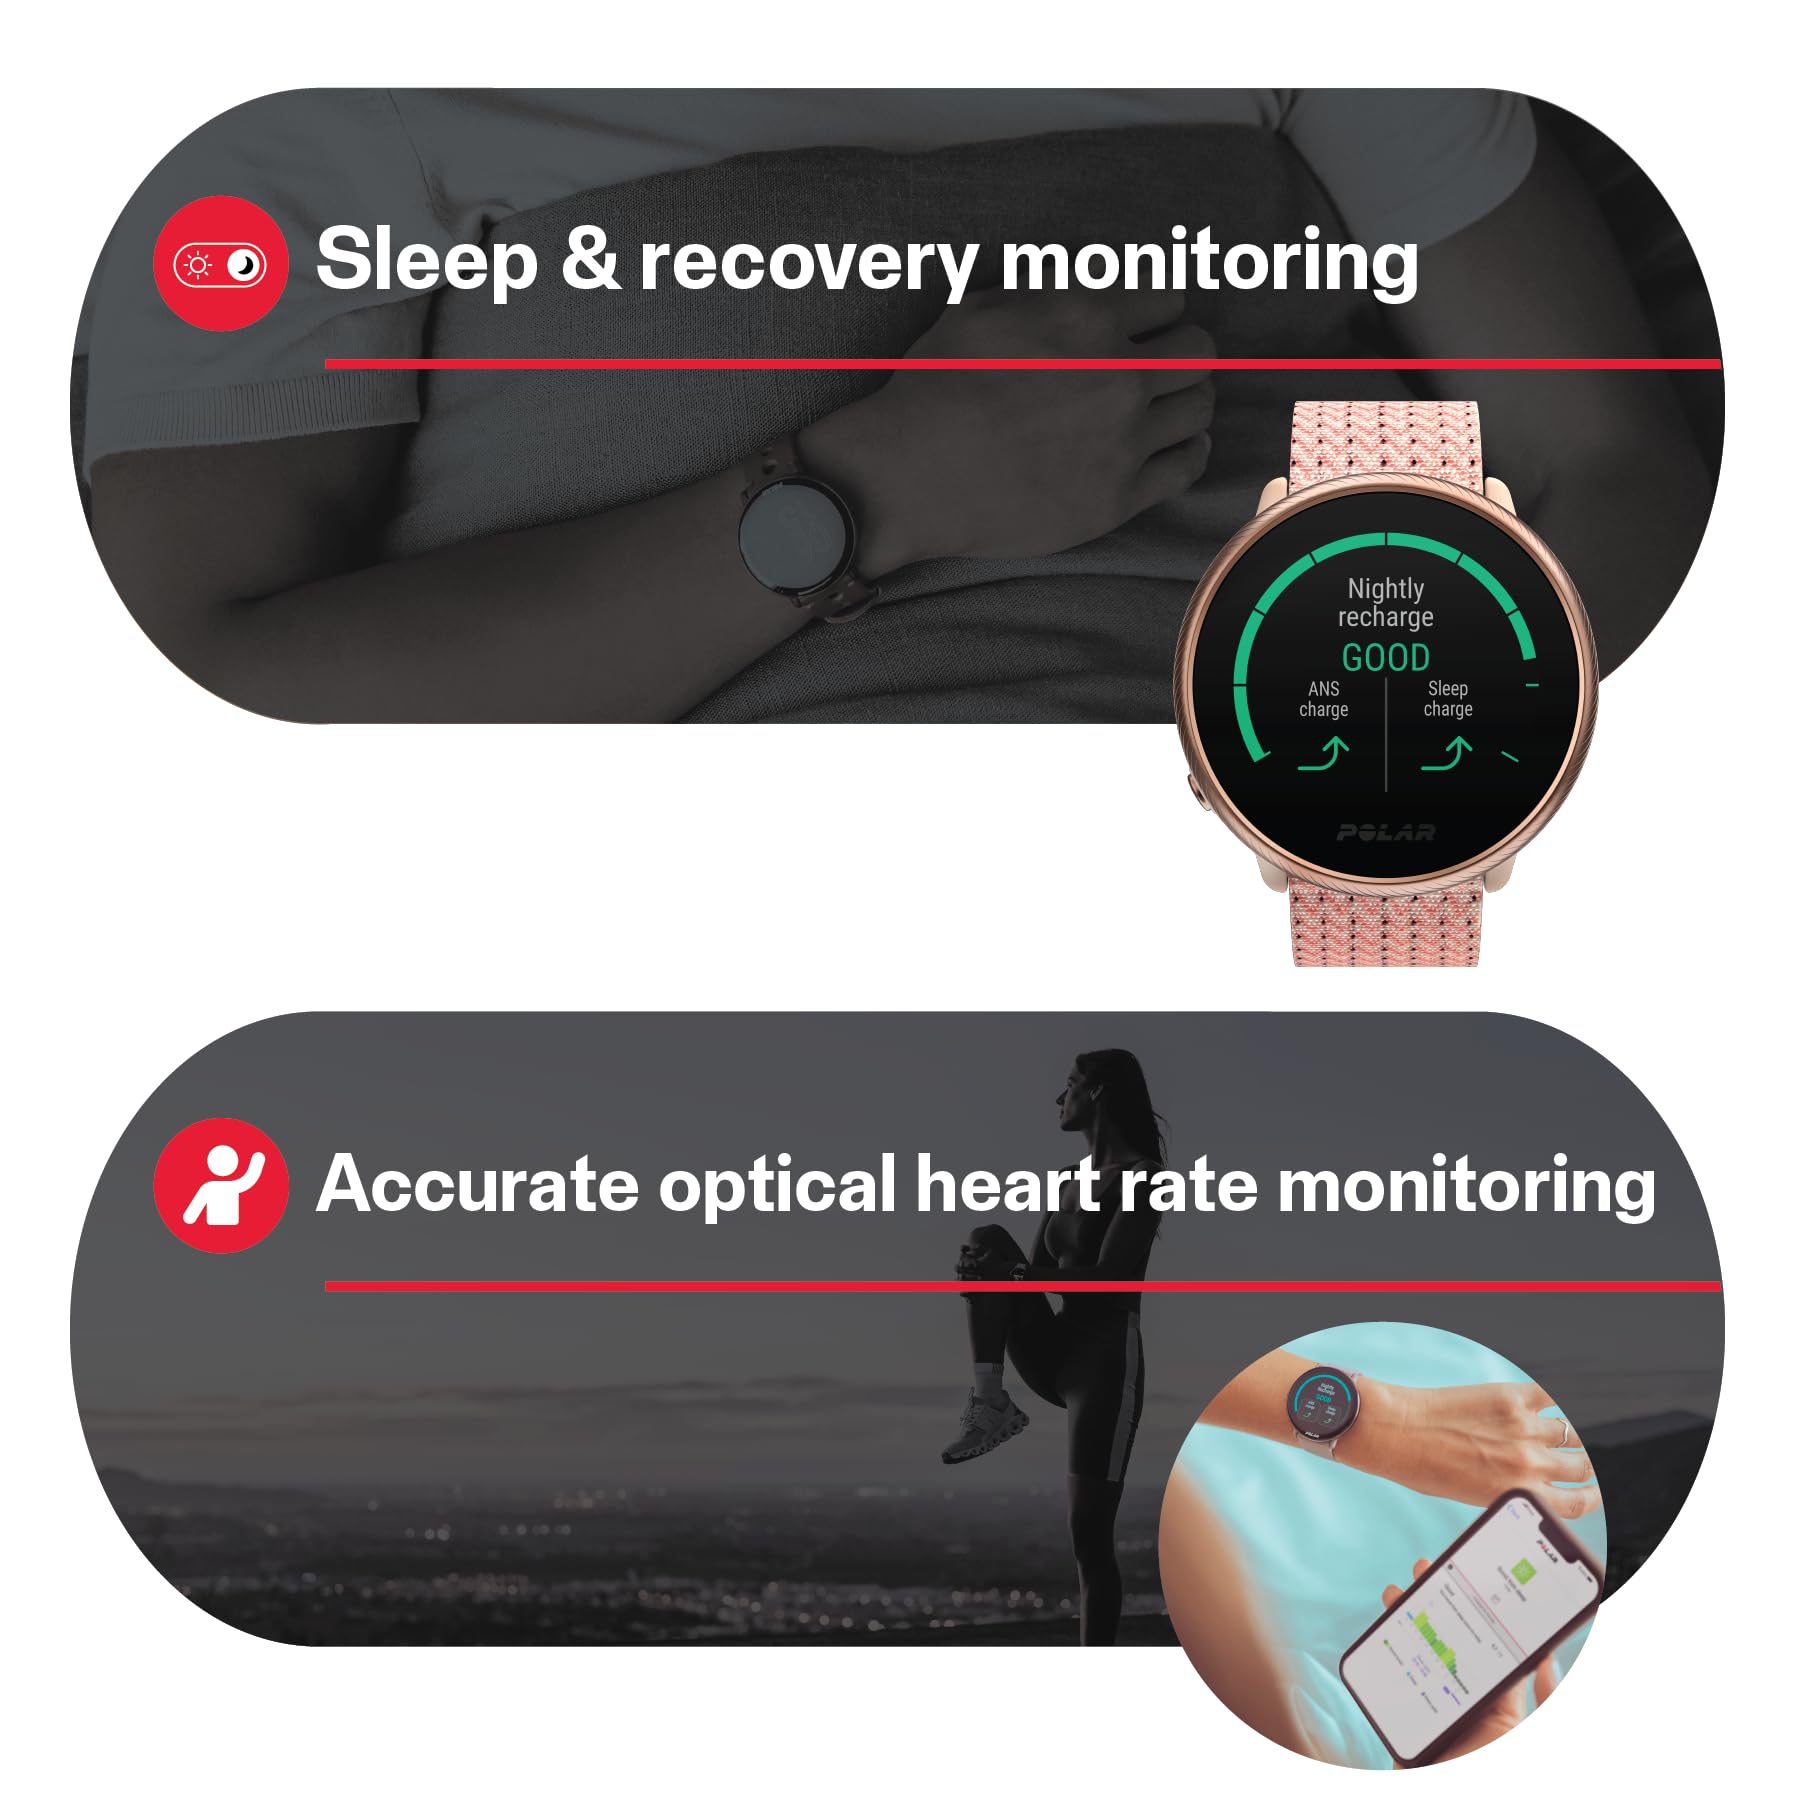 POLAR Ignite 2 - Fitness Smartwatch with Integrated GPS - Wrist-Based Heart Monitor - Personalized Guidance for Workouts, Recovery and Sleep Tracking - Music Controls, Weather, Phone Notifications